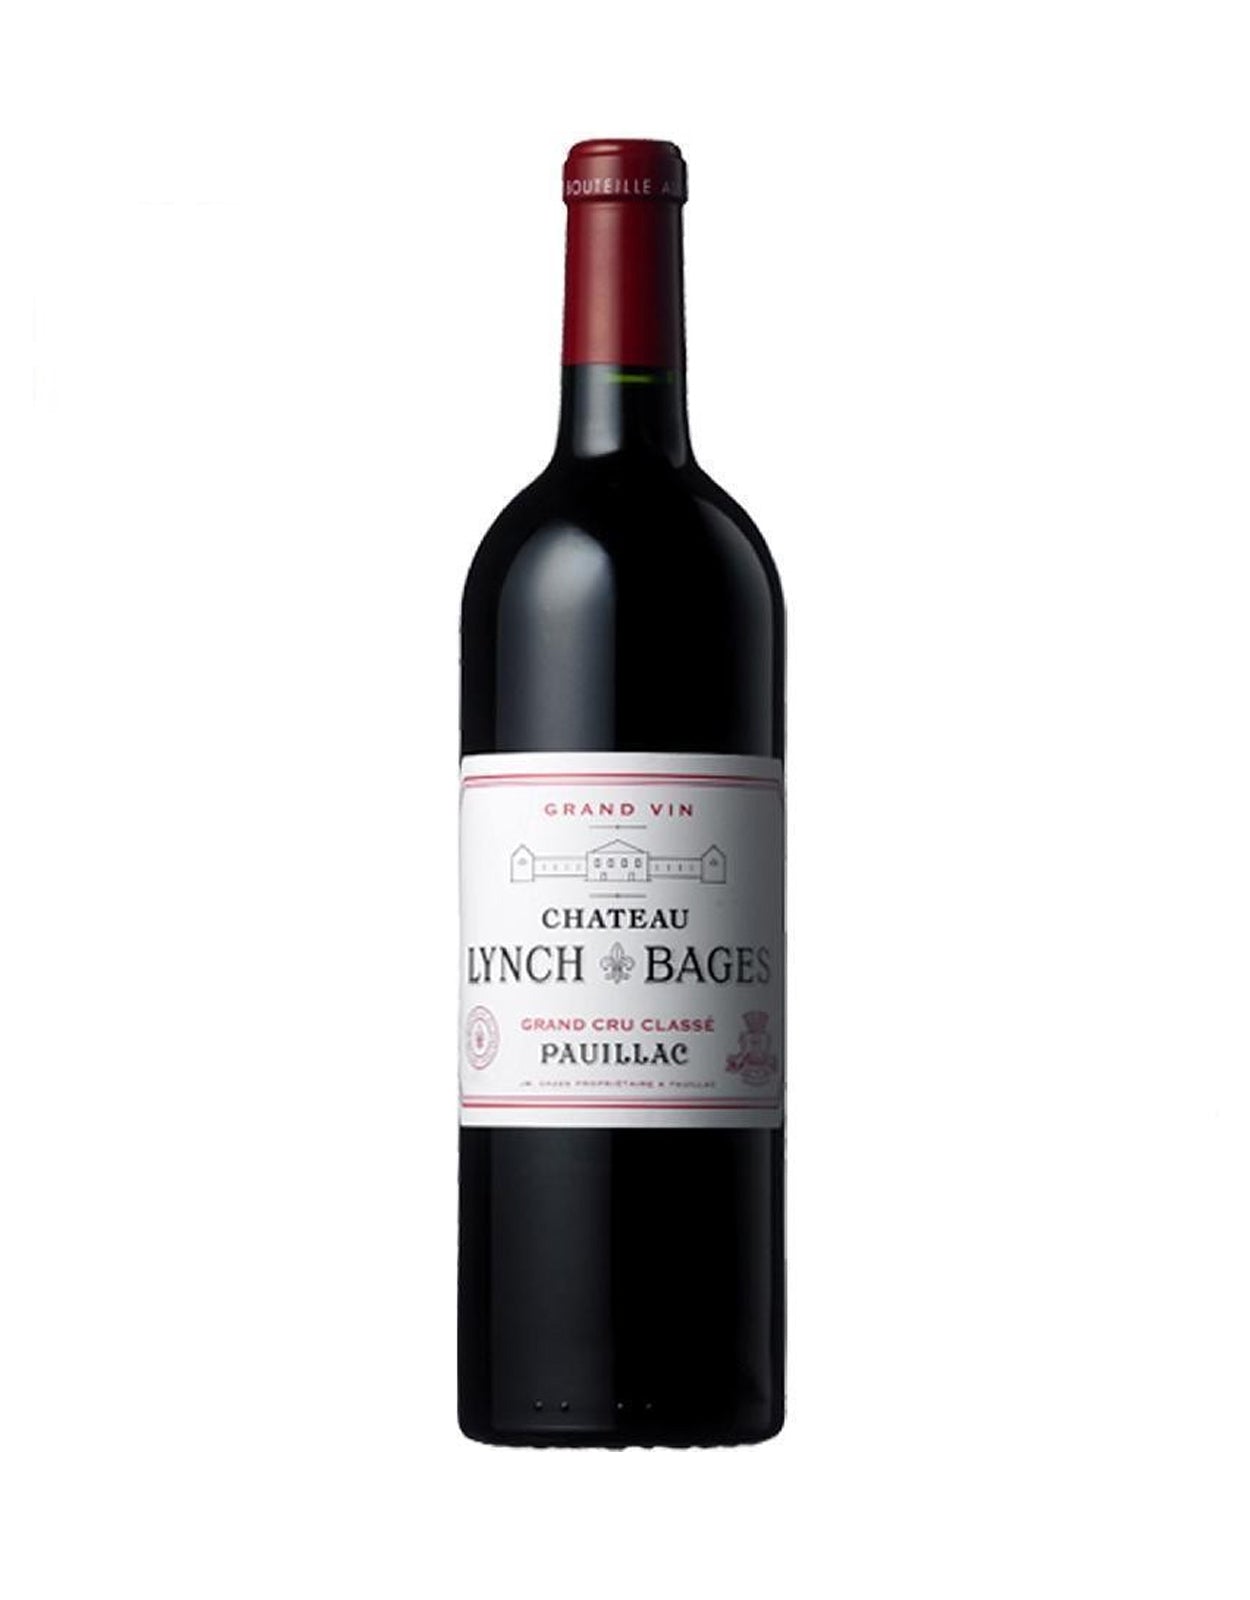 Chateau Lynch Bages 2009